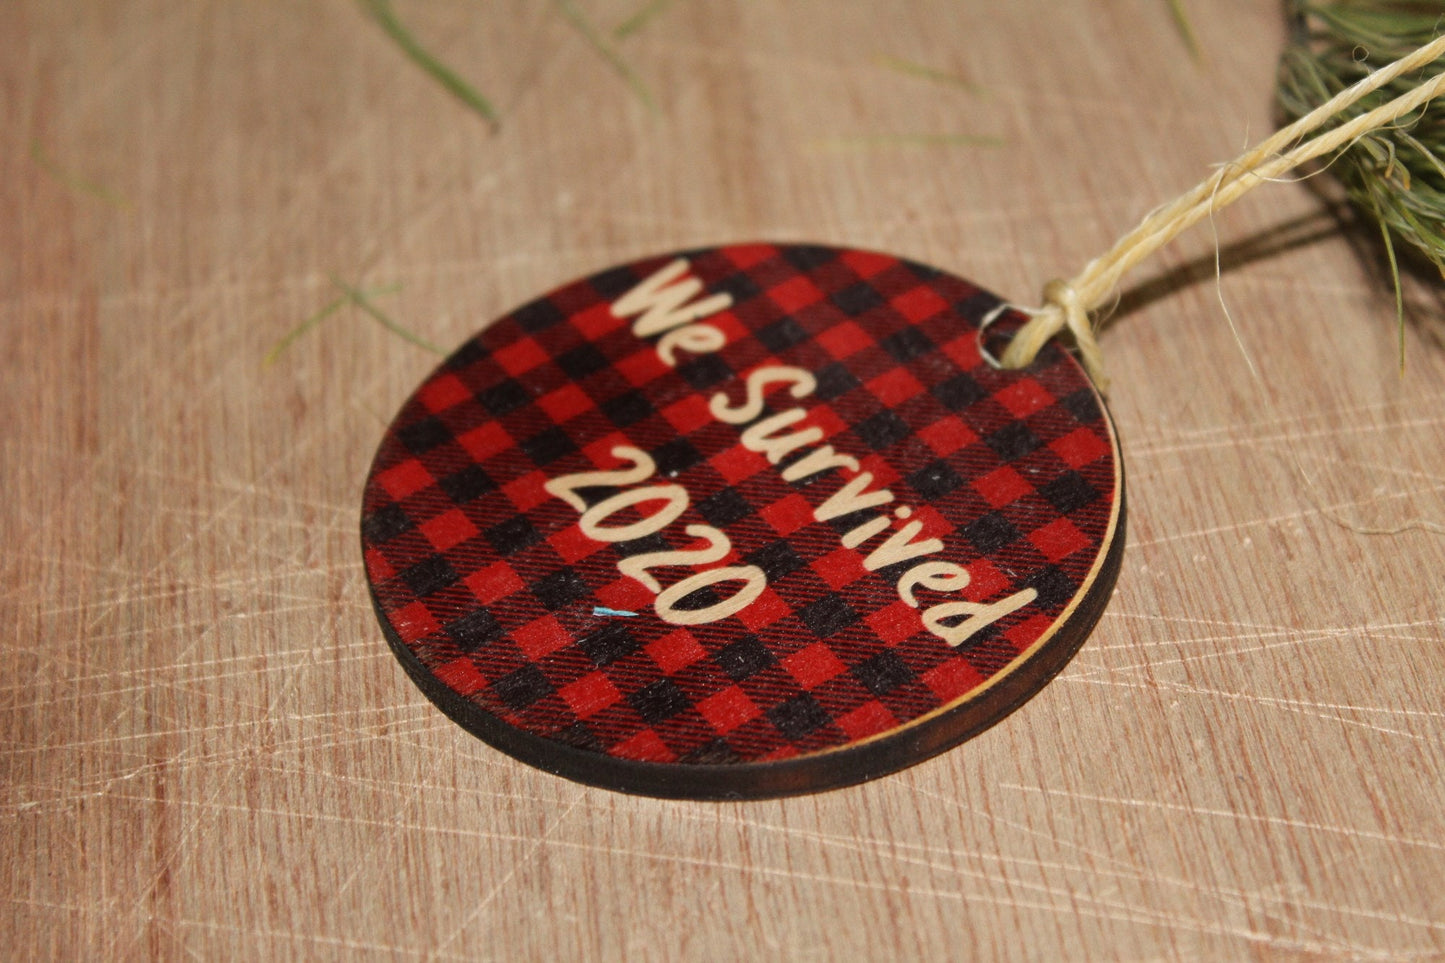 We Survived Giftable Ornament Wood Slice Red Buffalo Plaid Christmas Tree Primitive Rustic Tree Printed Funny Covid Pandemic Farmhouse